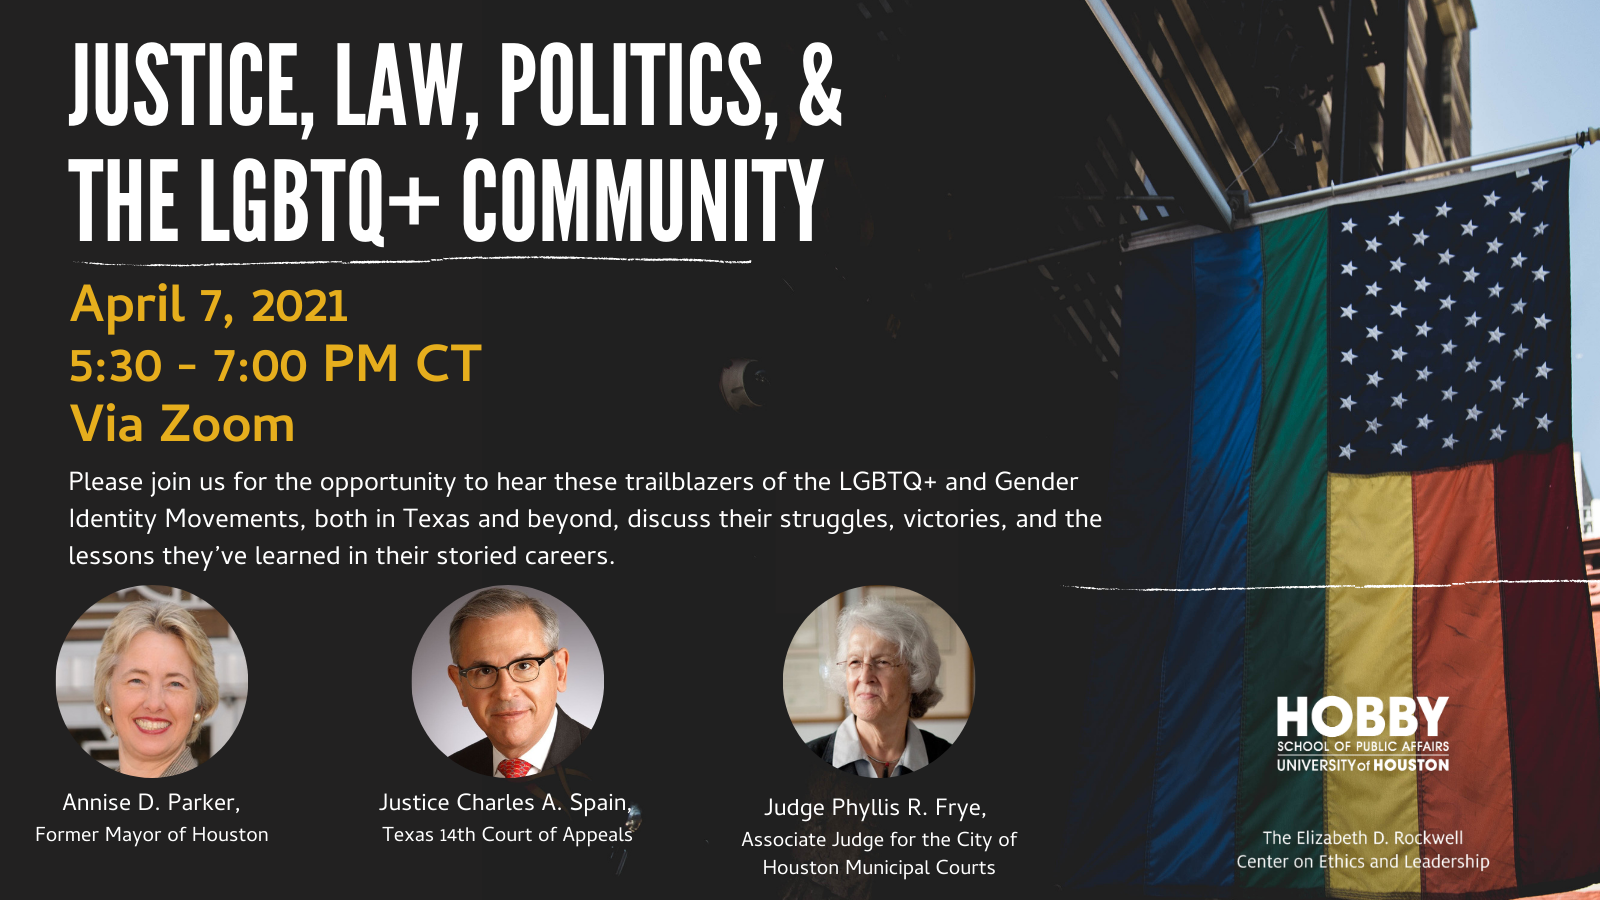 event flyer of justice, law, politics, and the LGBTQ+ community talk with Annise Parker, Justice Charles A. Spain, and Judge Phyllis Frye